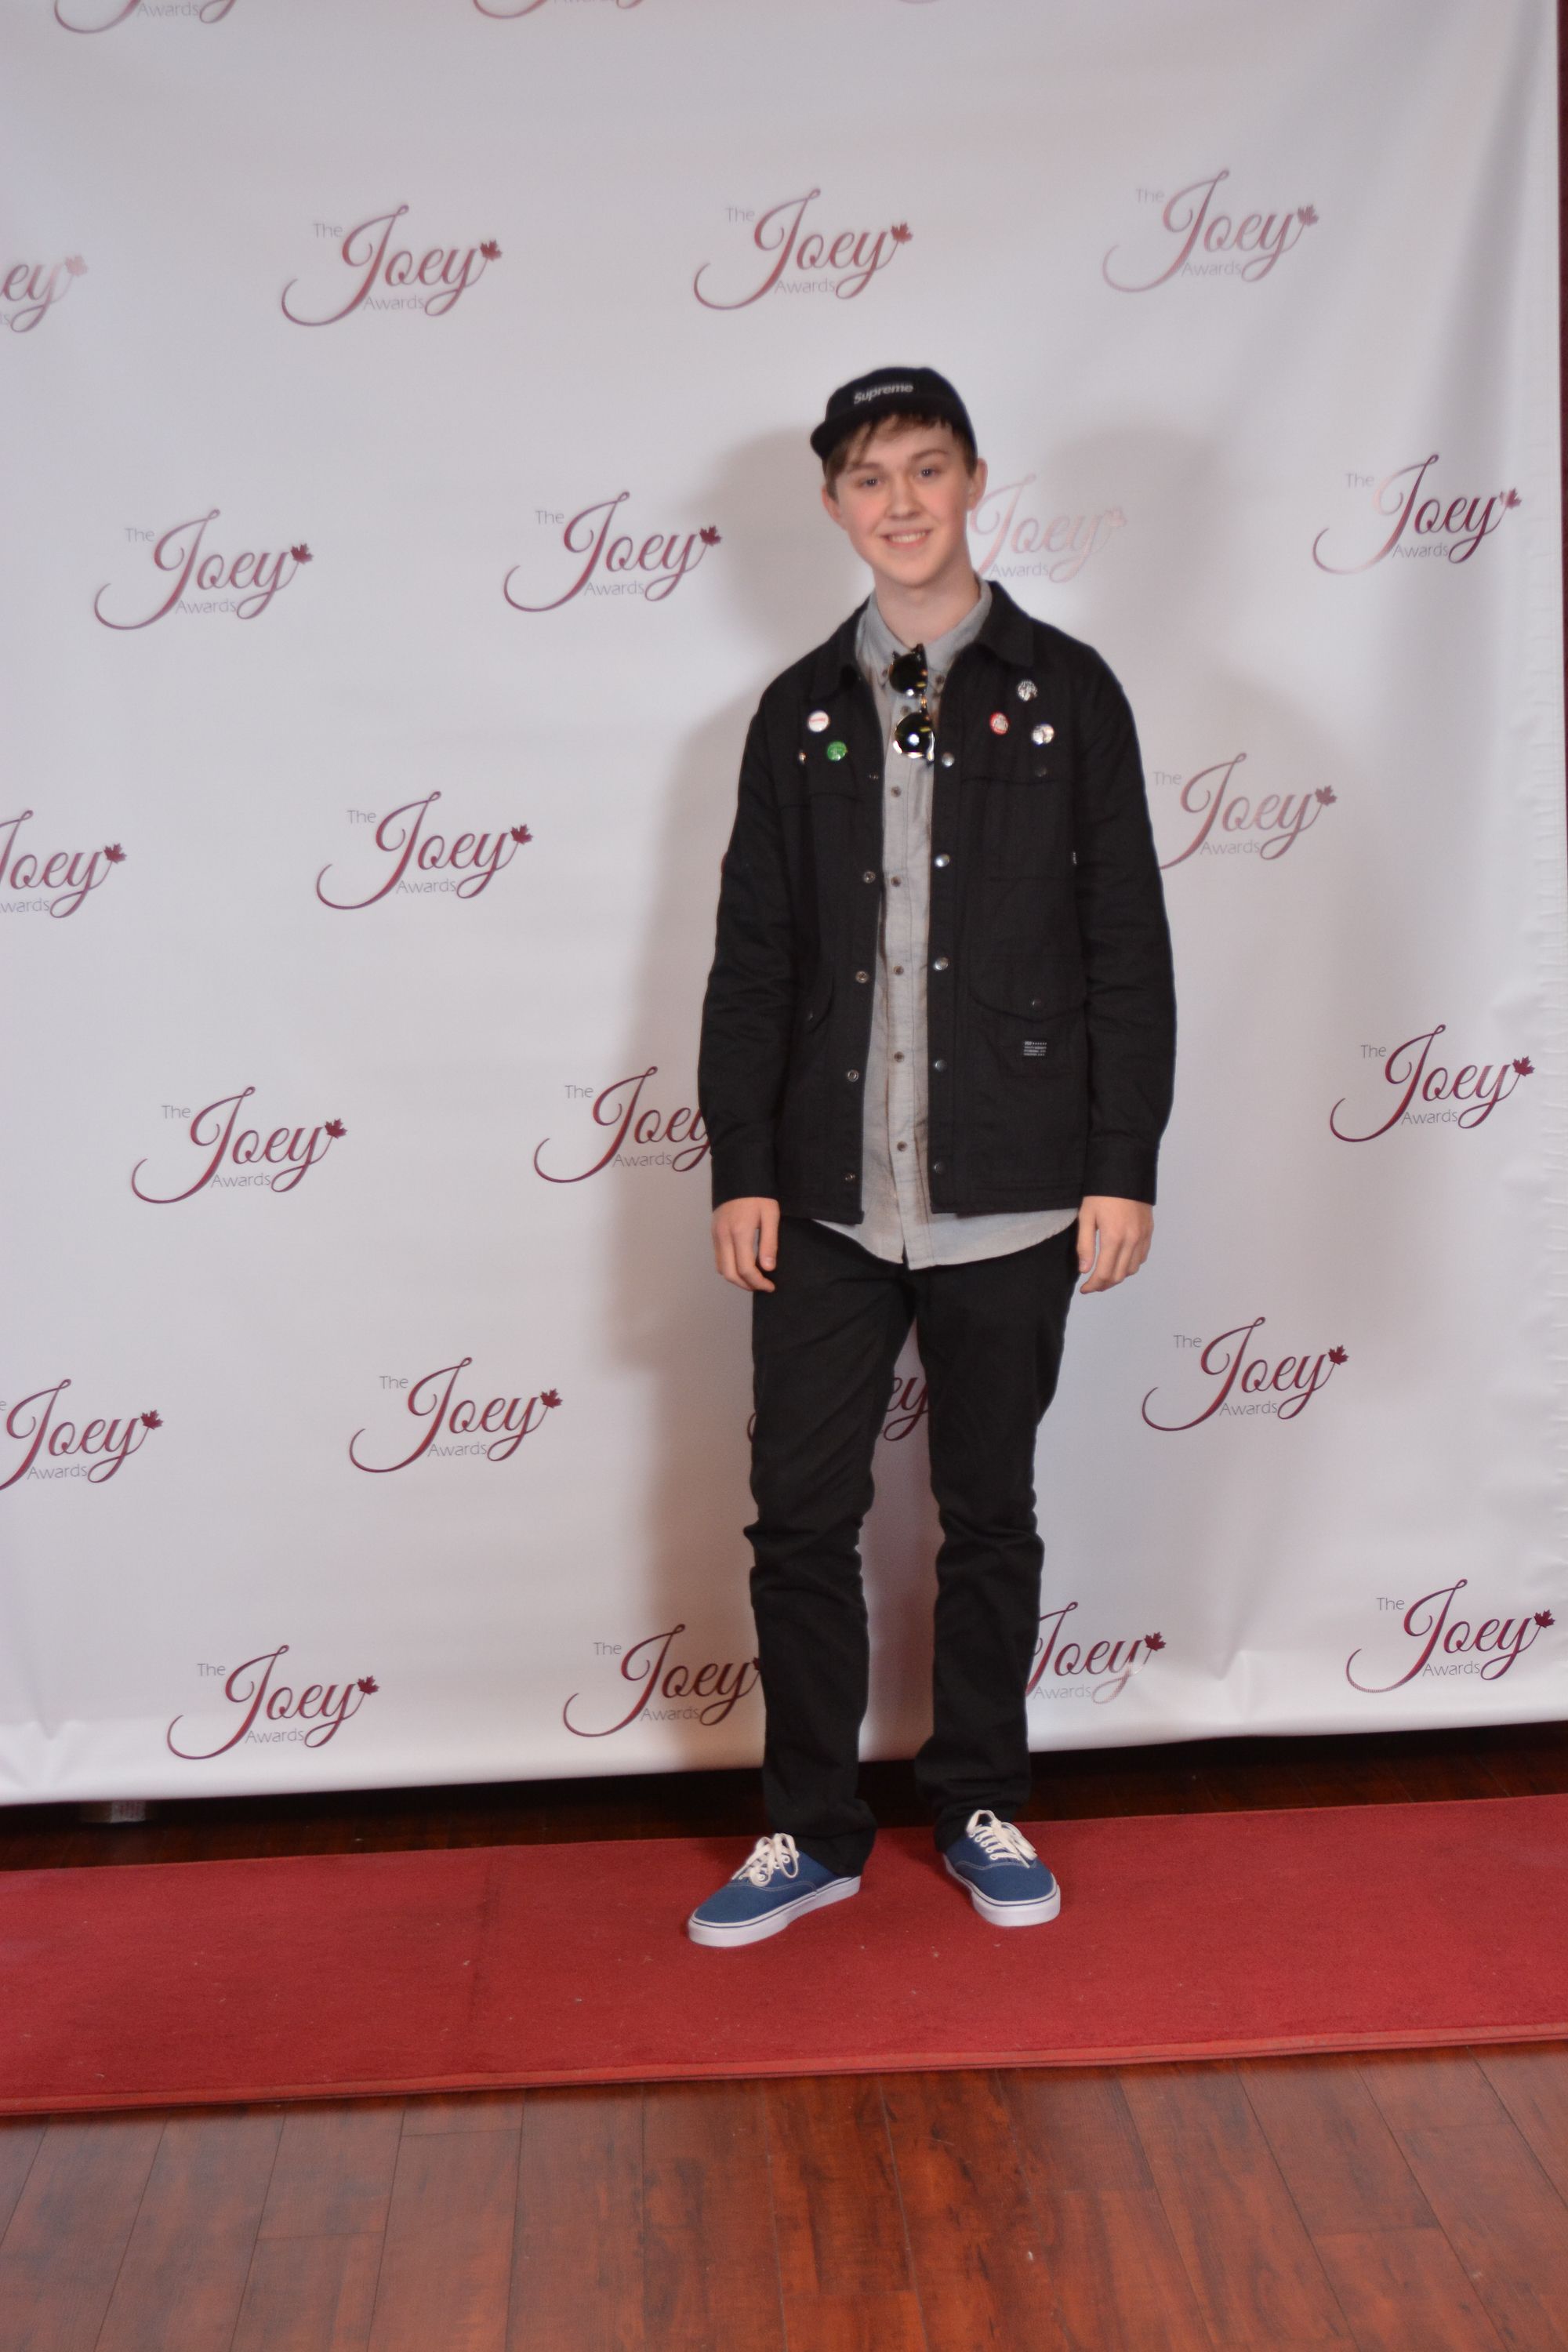 Red carpet at the 2014 Joey Awards, Vancouver, November 16th 2014